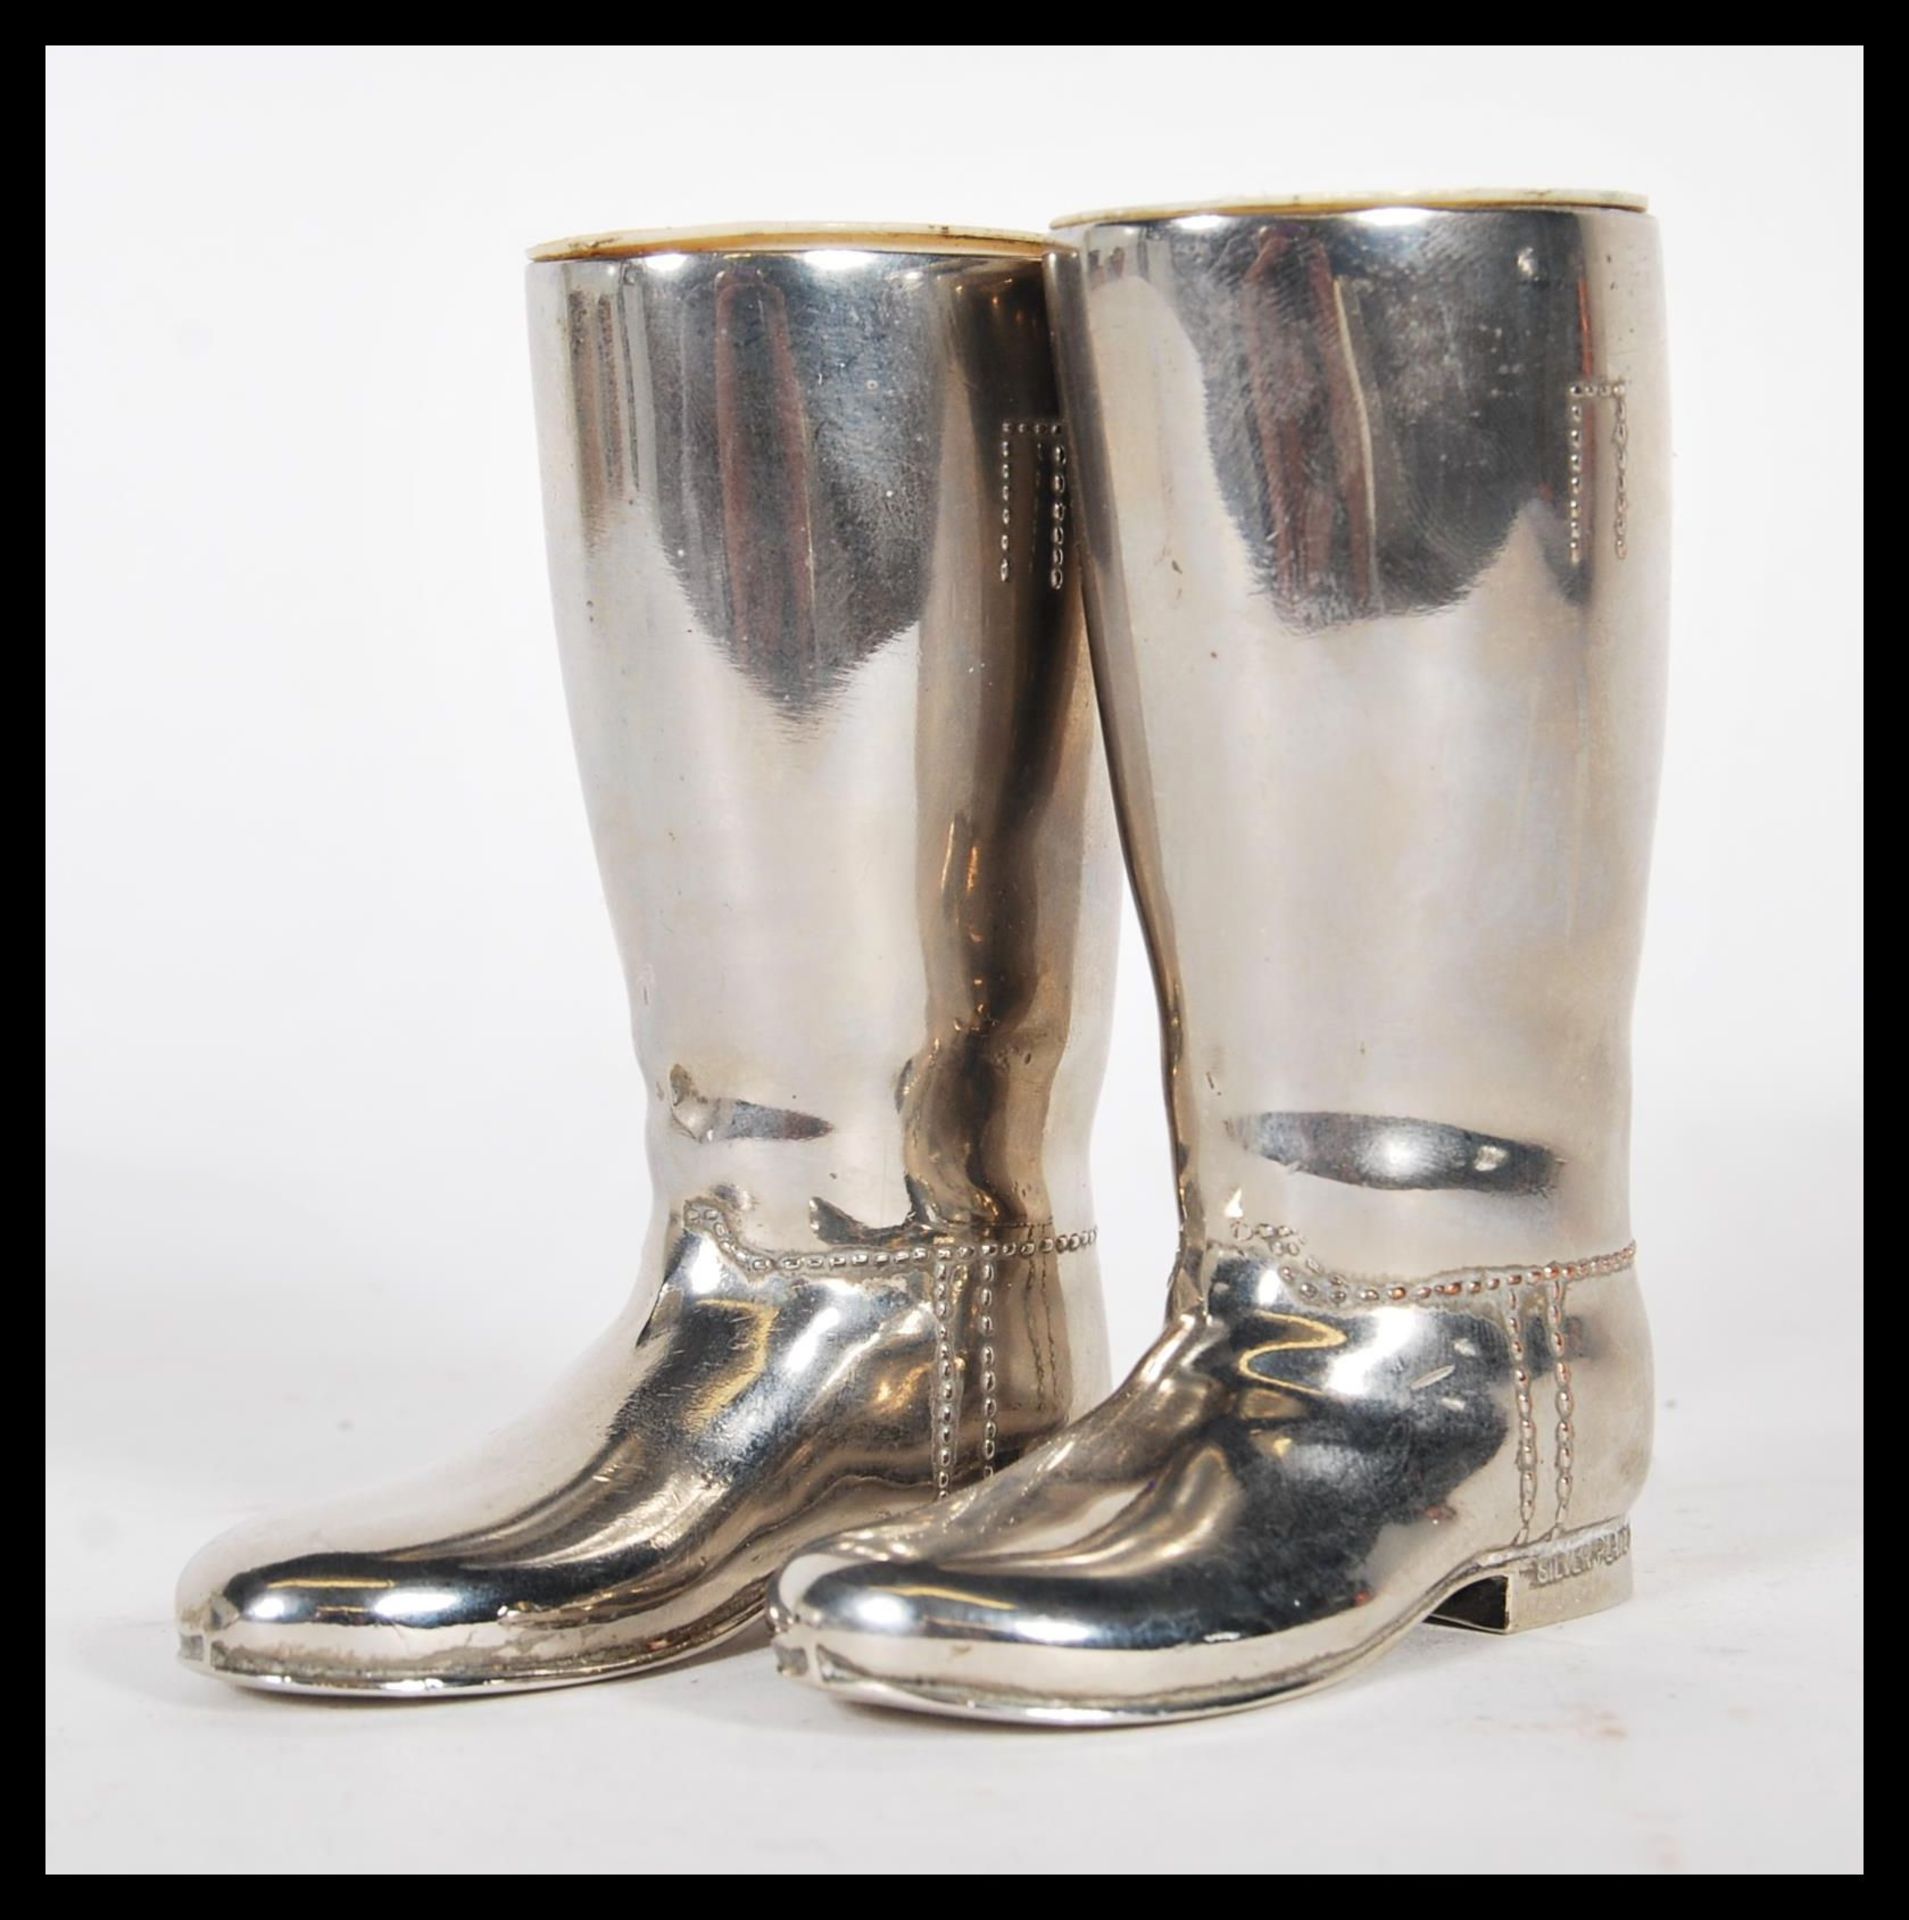 A pair of 20th century silver plated drinks measures for spirits in the form of horde riding